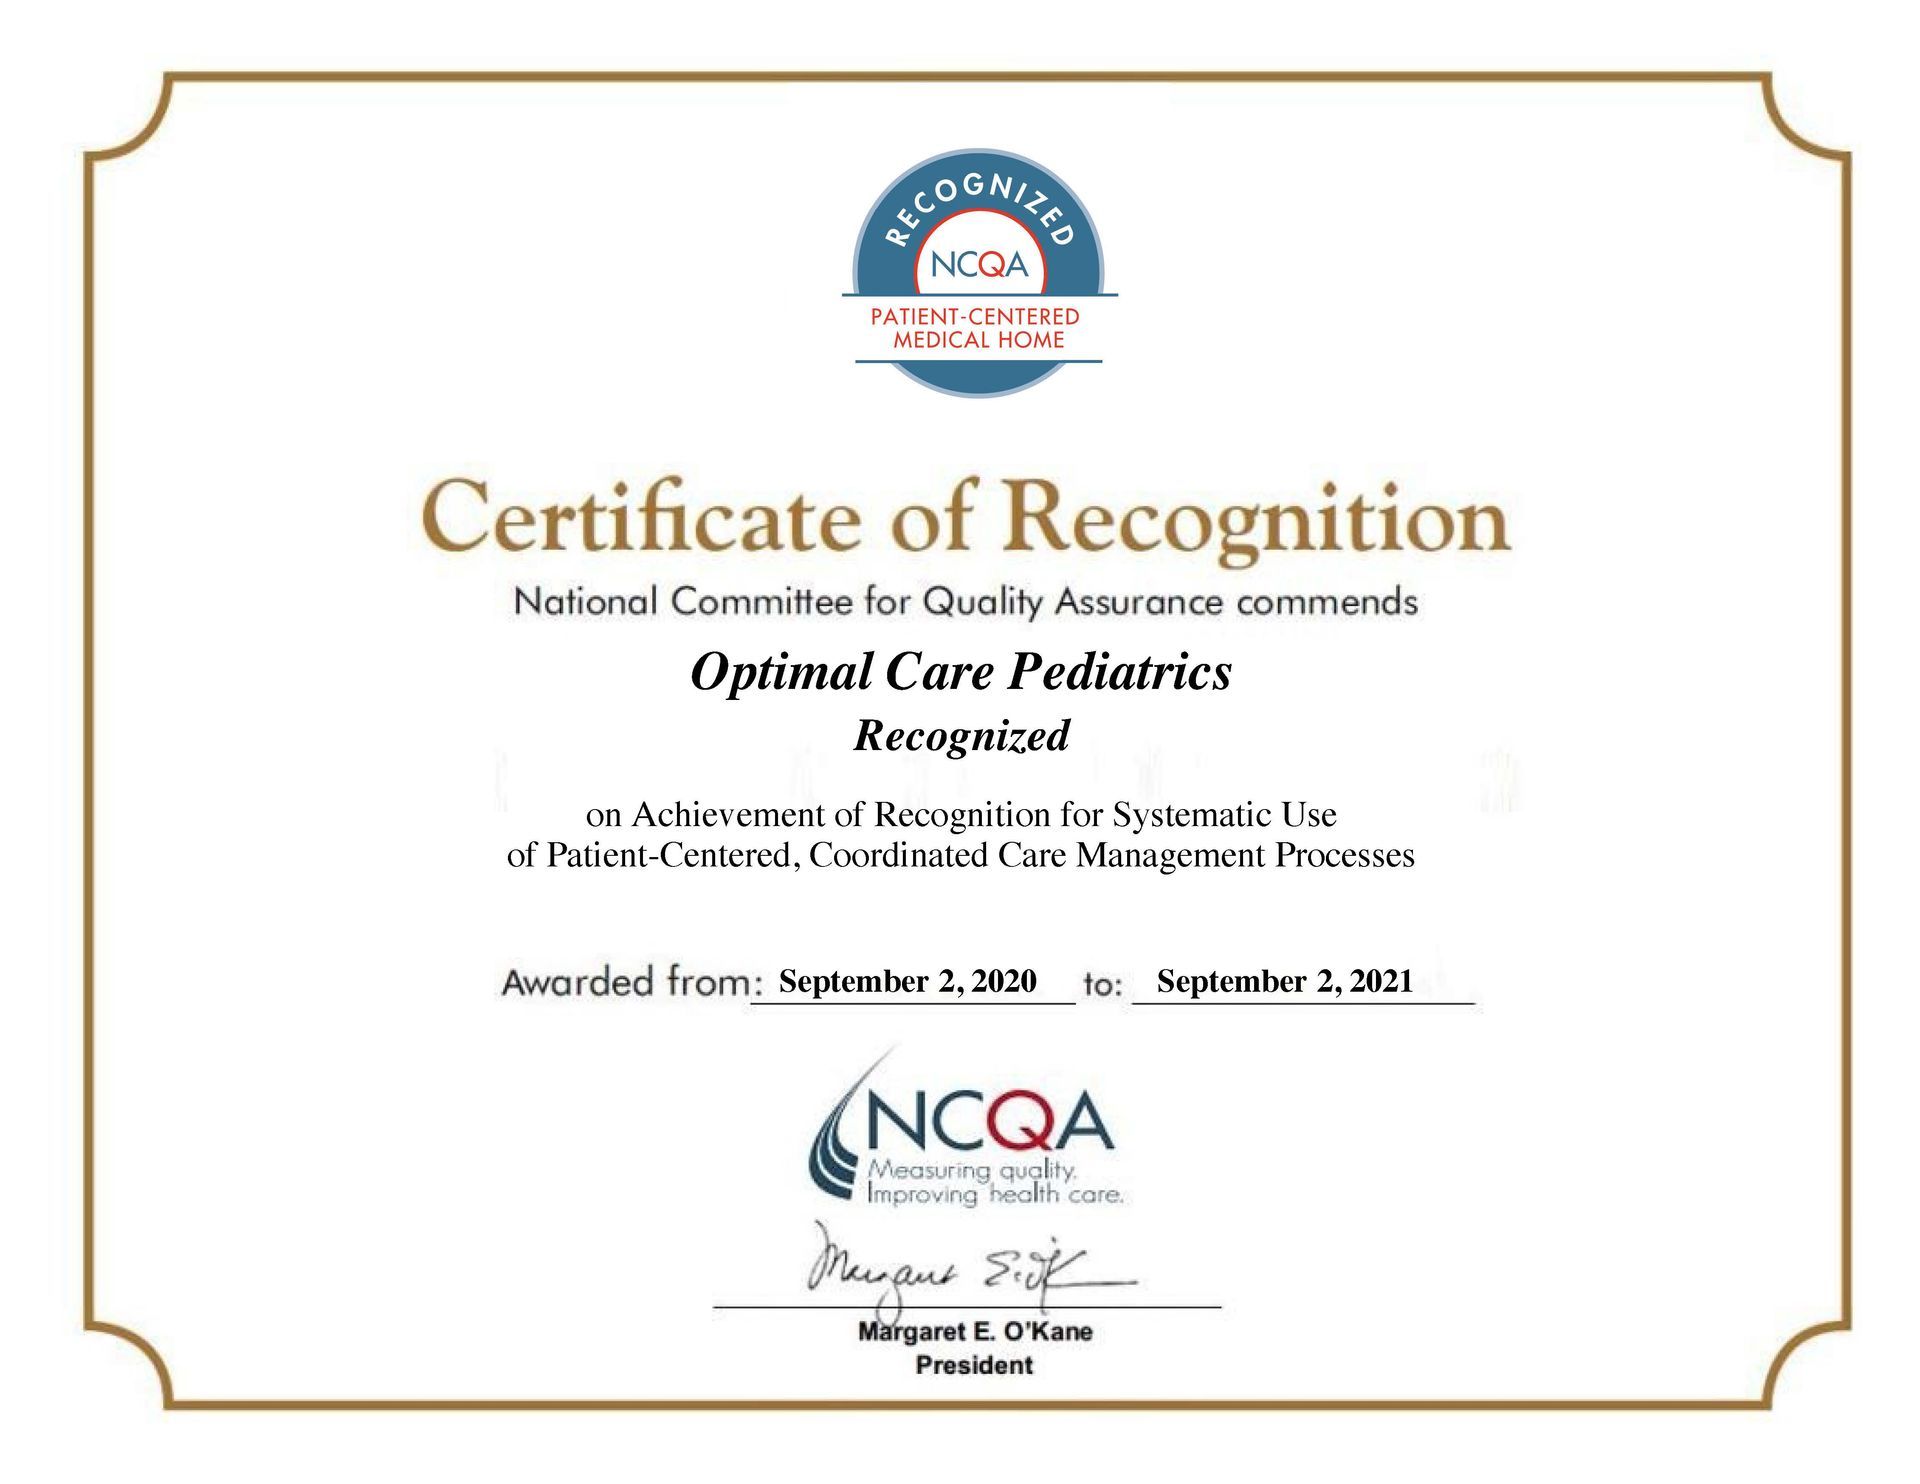 Certificate of Recognition for the National Committee for Quality Assurance - Optimal Care Pediatrics